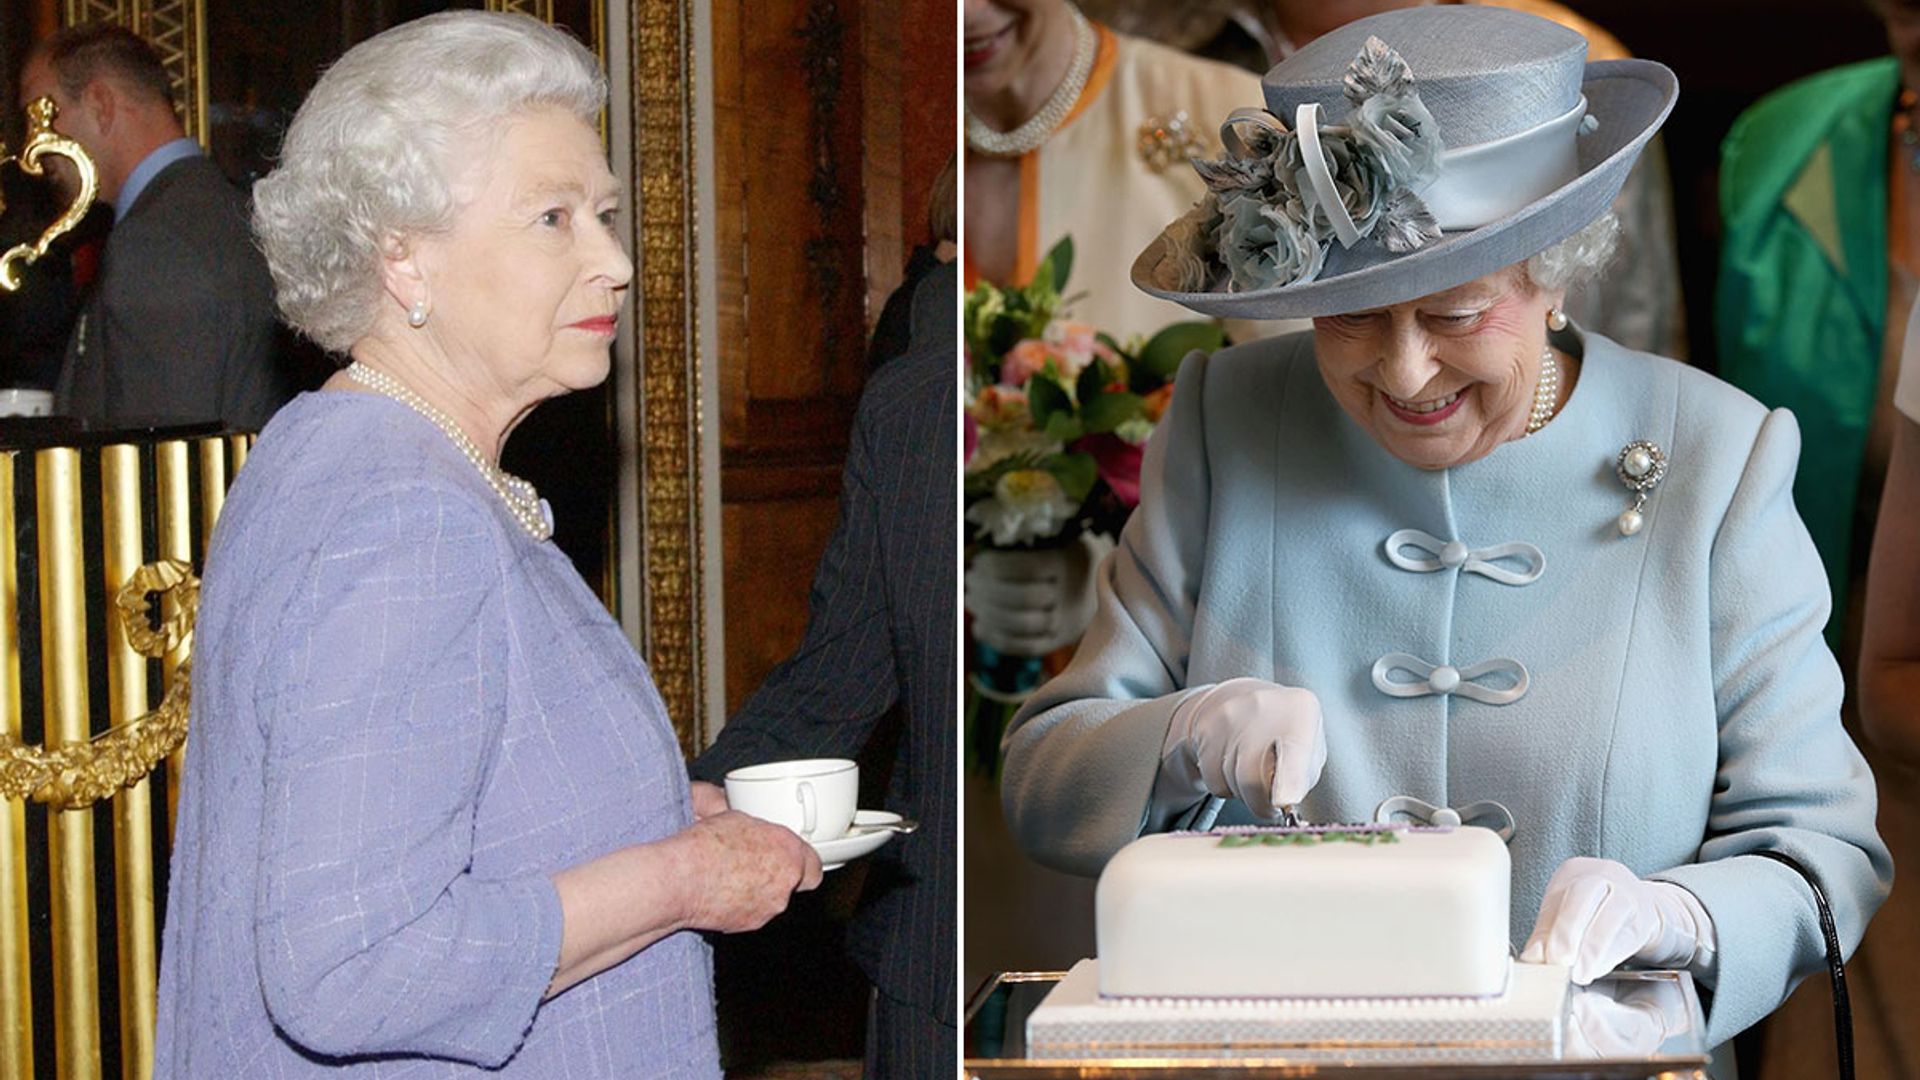 The Queen's afternoon tea habit revealed – and it involves cake!